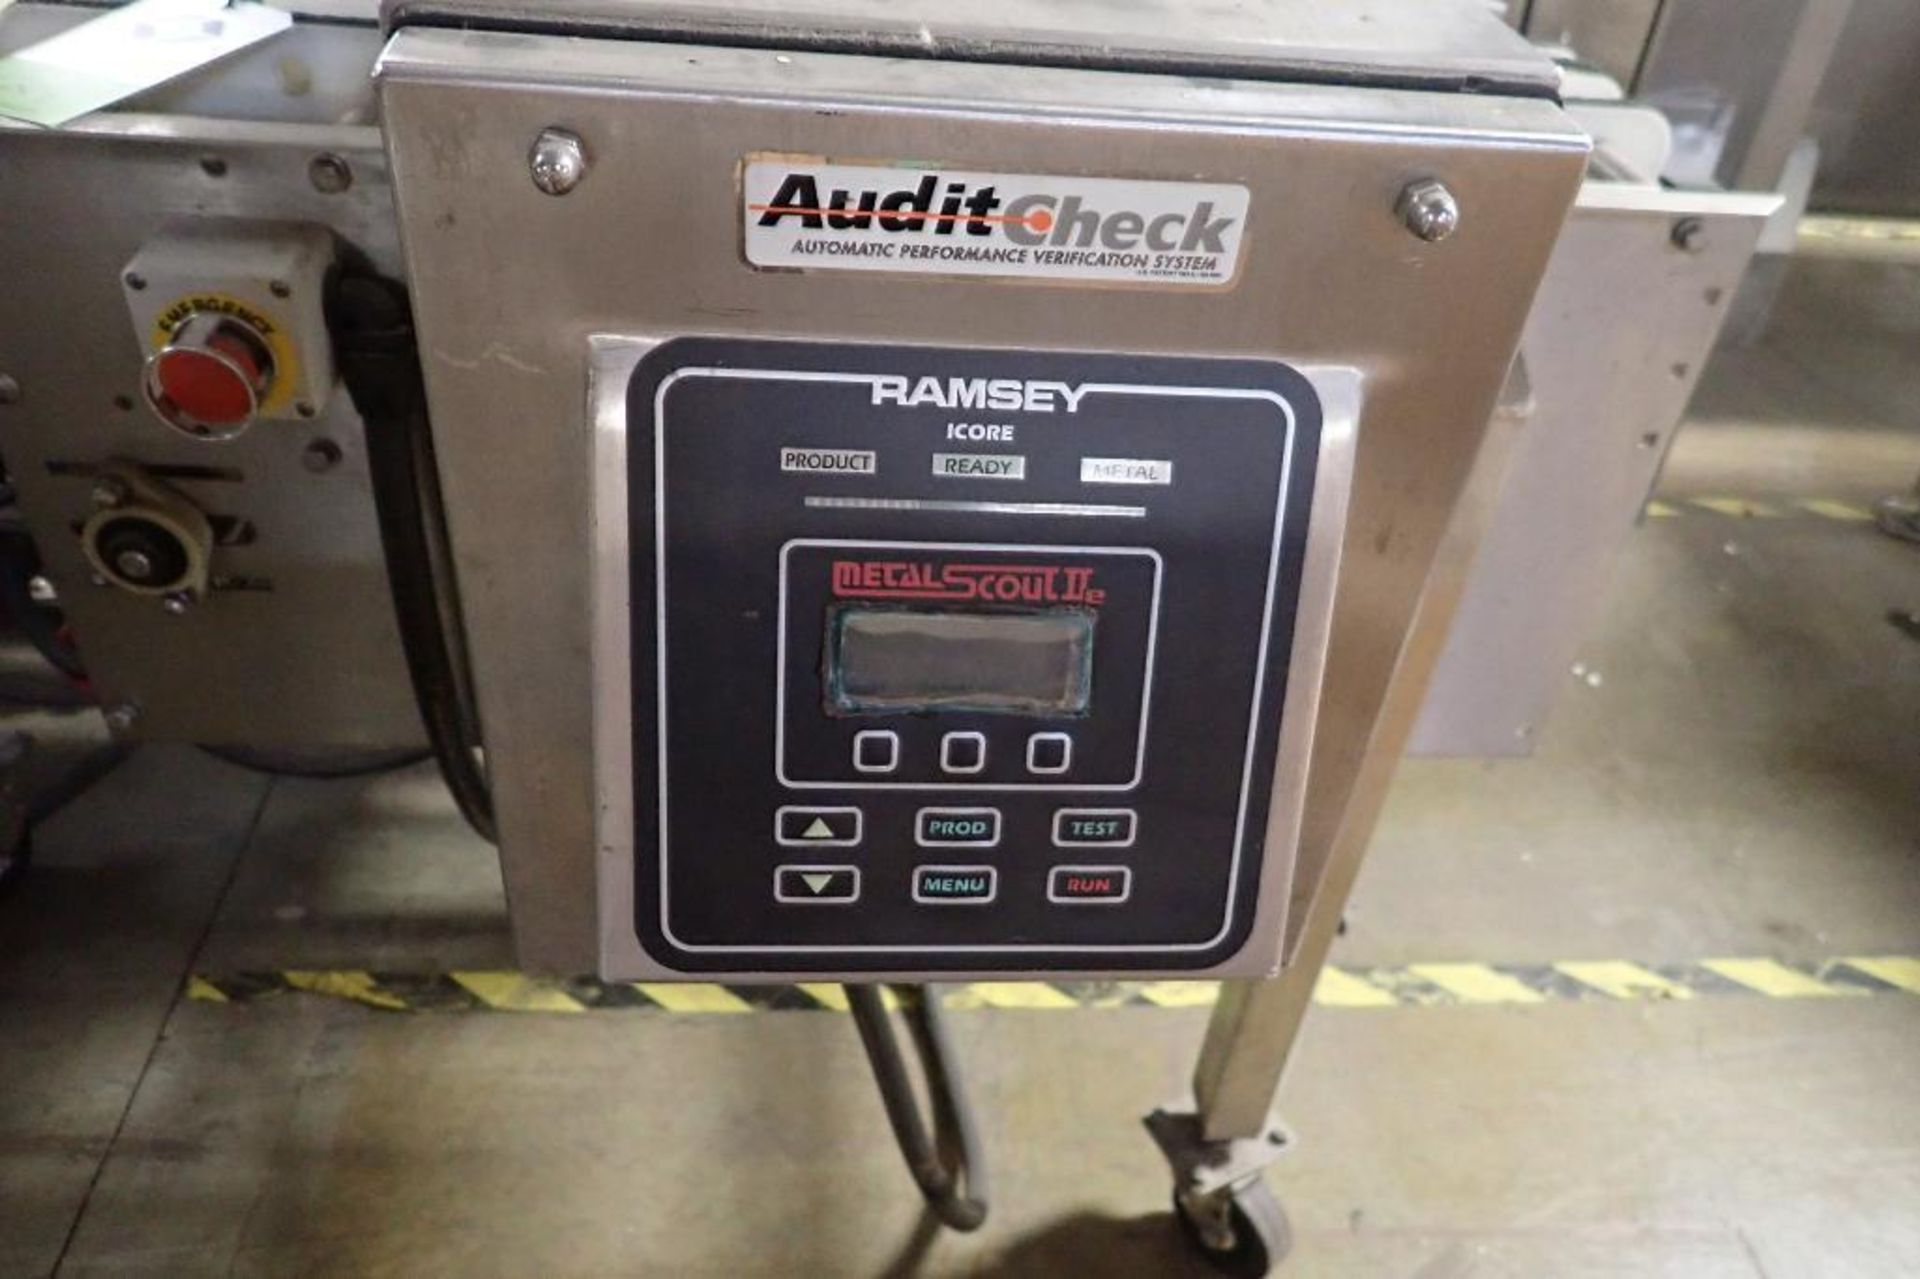 Ramsey metal detector check weigher combo, aperture 13.5 in. wide x 3.5 in. tall, SS frame, SN 99410 - Image 3 of 10